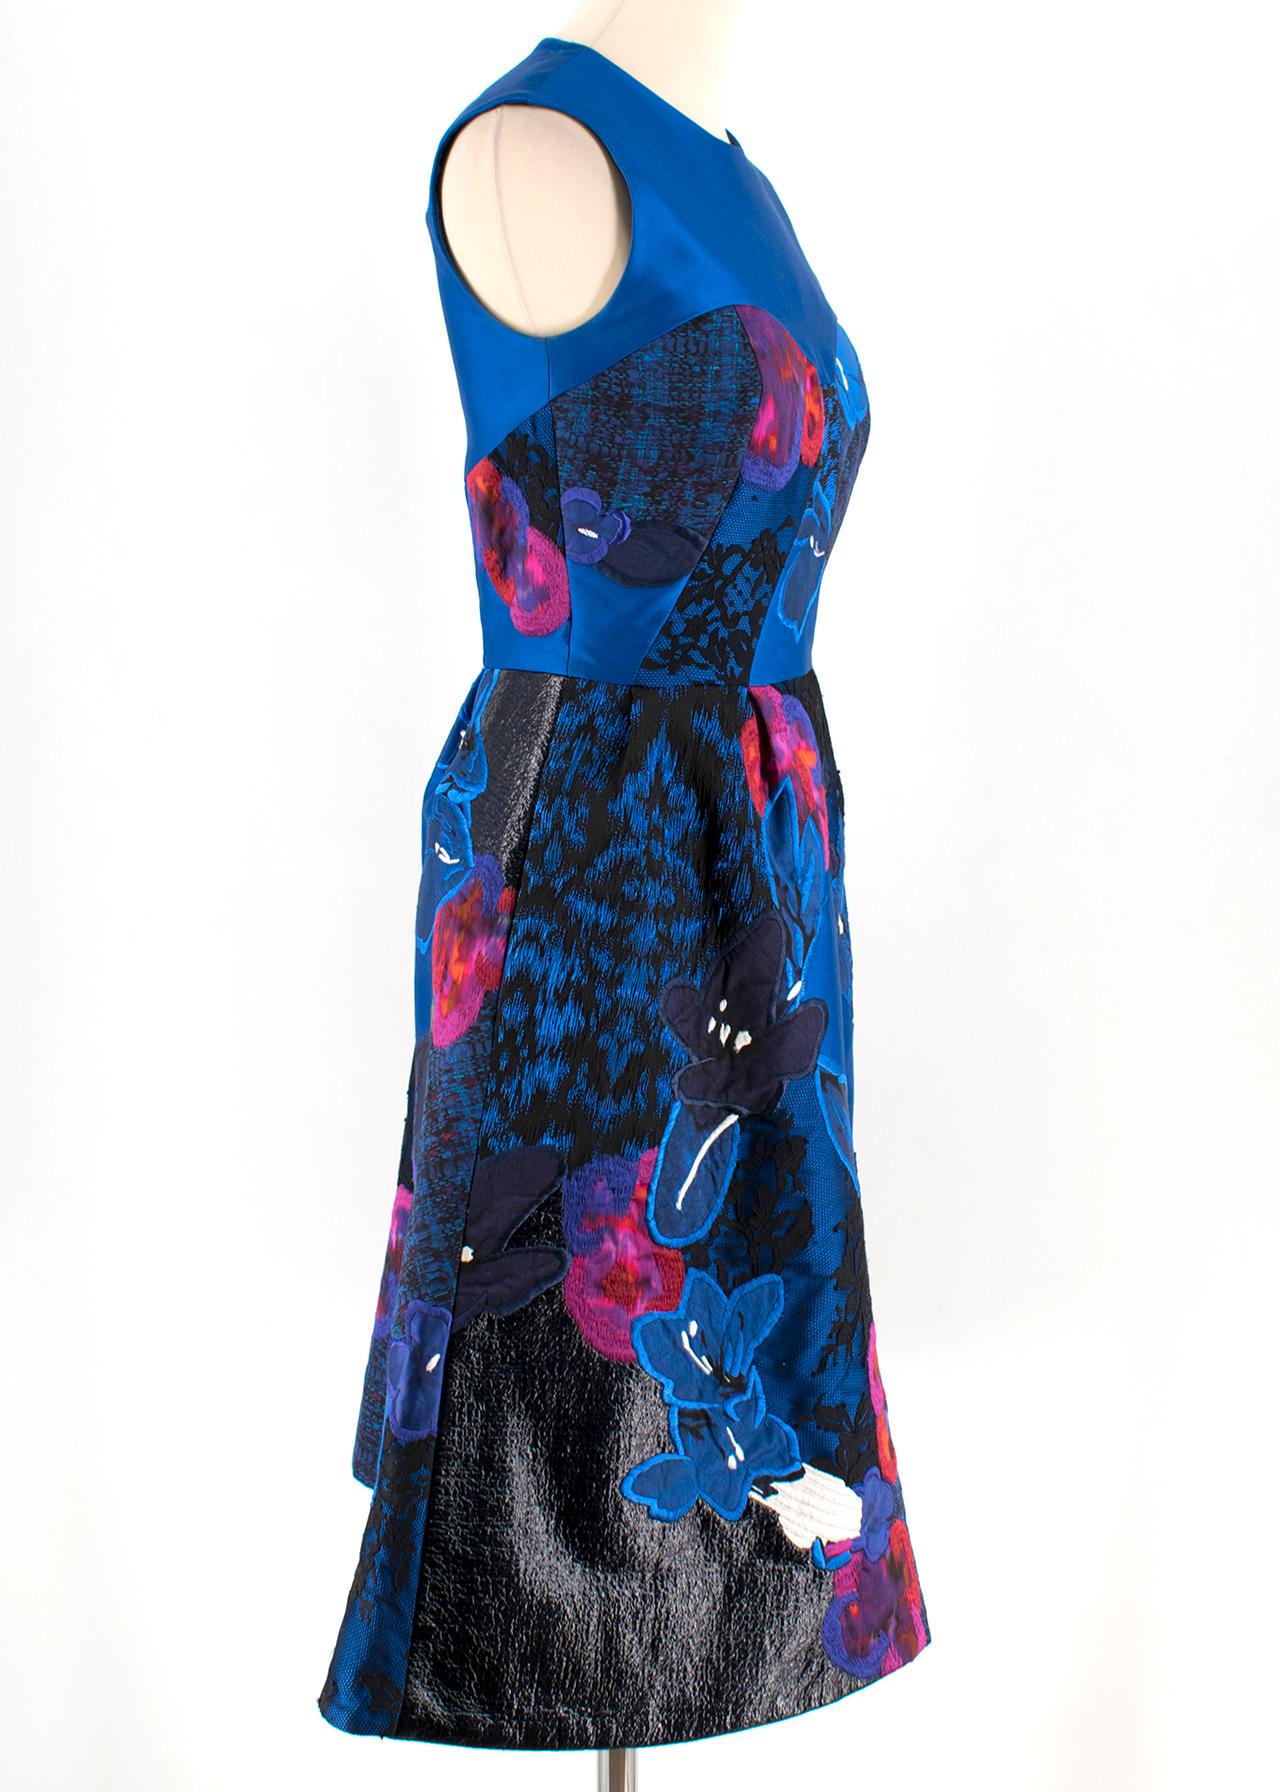 Erdem Floral Embroidered Blue Jacquard Dress

- blue jacquard dress
- midi length 
- floral motives
- black lace embellishment
- round neckline
- sleeveless
- silk lining 
- zip and hoop closure to the back 

Please note, these items are pre-owned